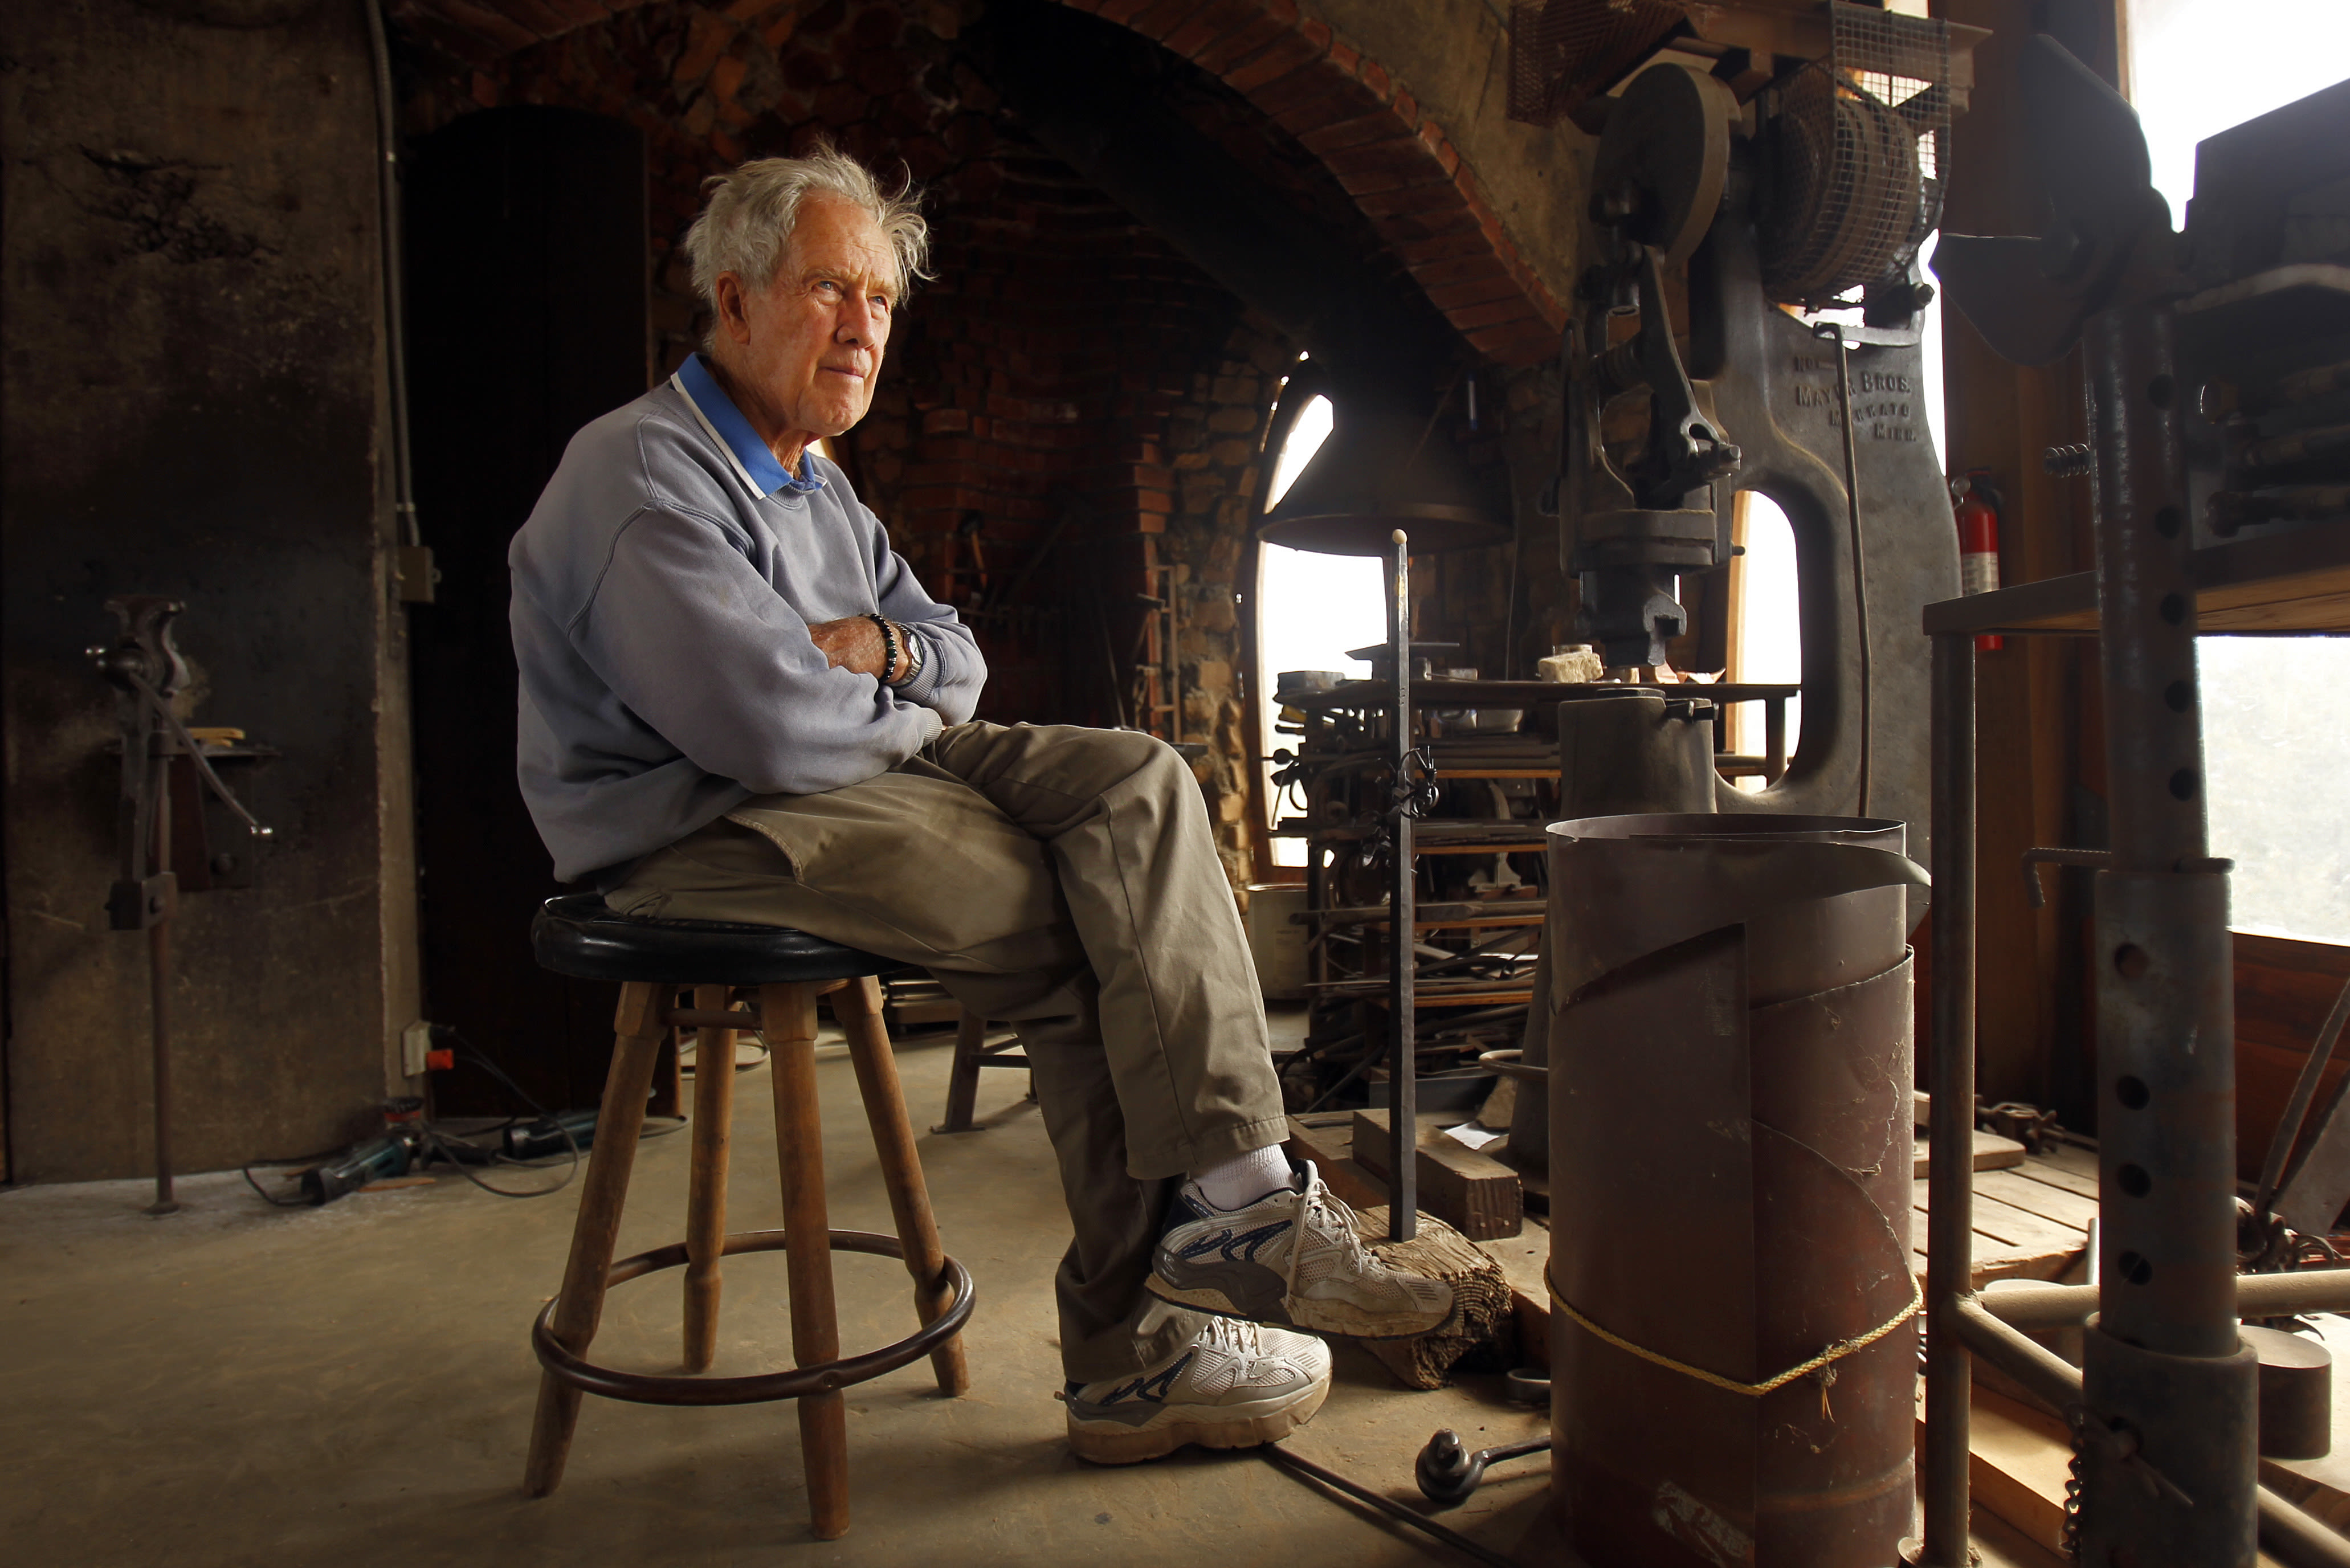 James Hubbell, San Diego's iconic sculptor, artist, naturalist and peace advocate, dies at 92